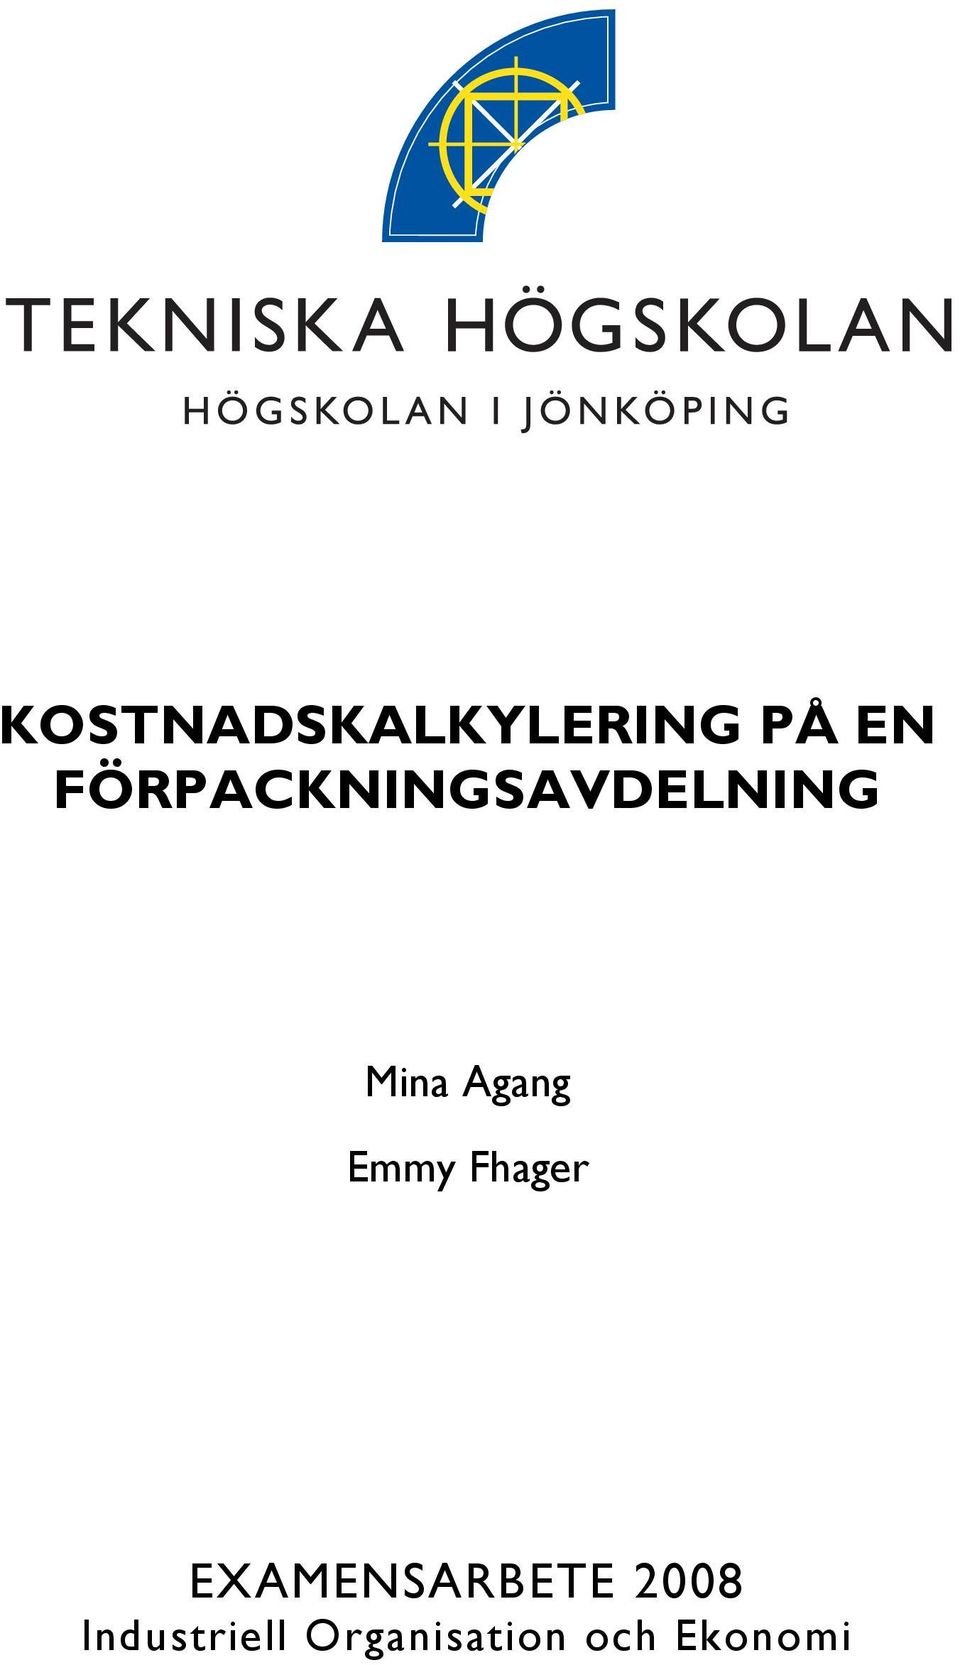 Agang Emmy Fhager EXAMENSARBETE